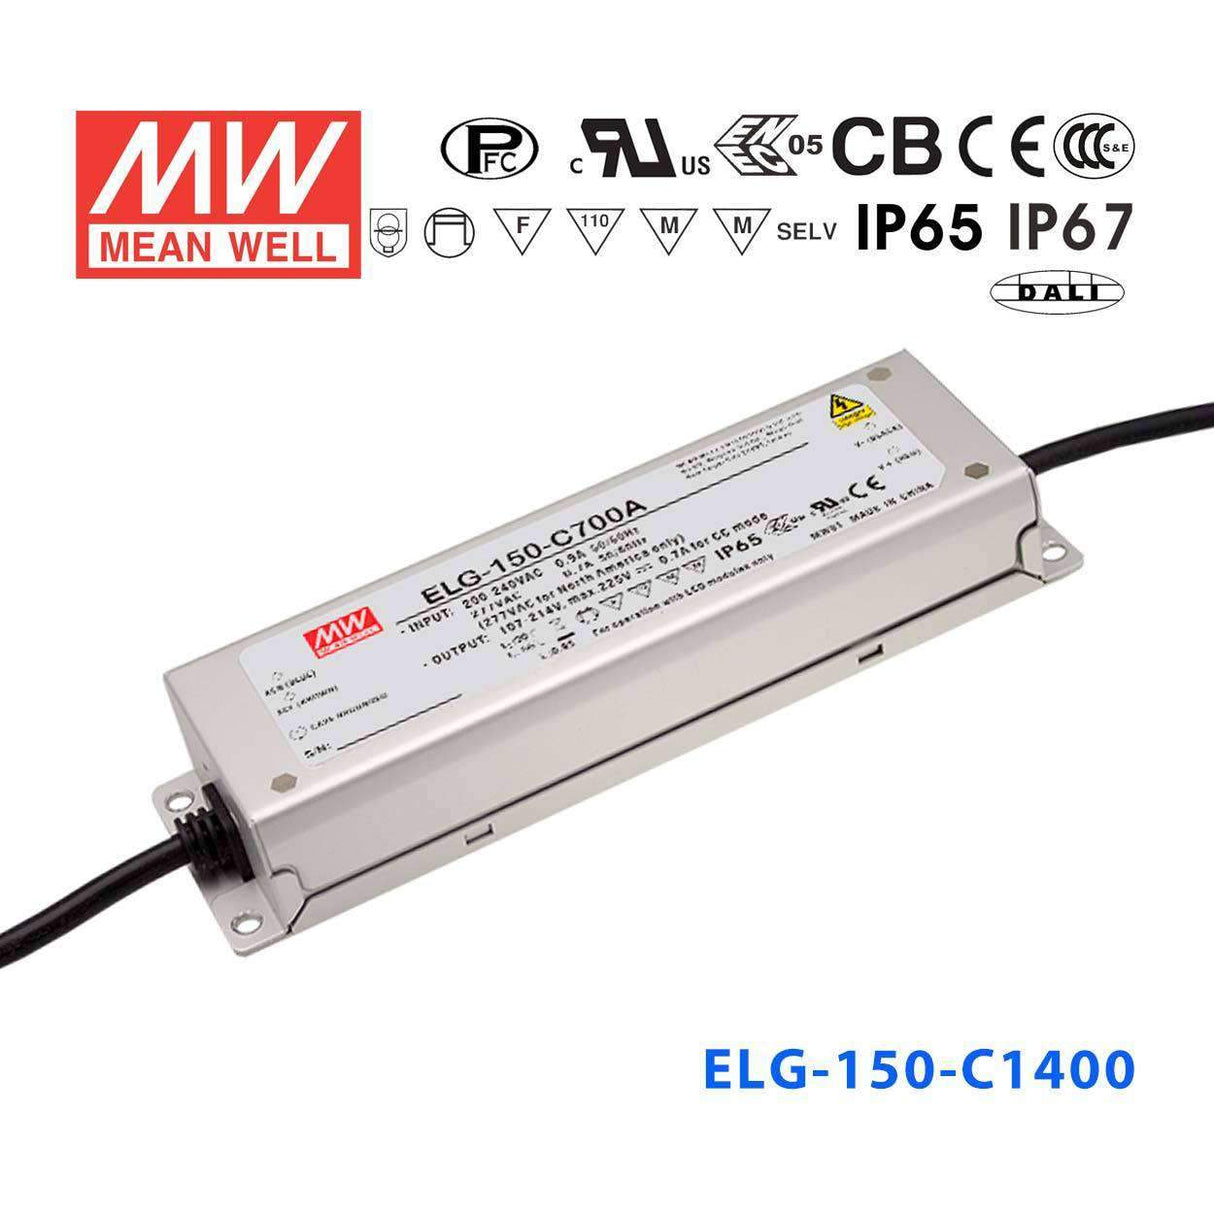 Mean Well ELG-150-C1400 Power Supply 150W 1400mA